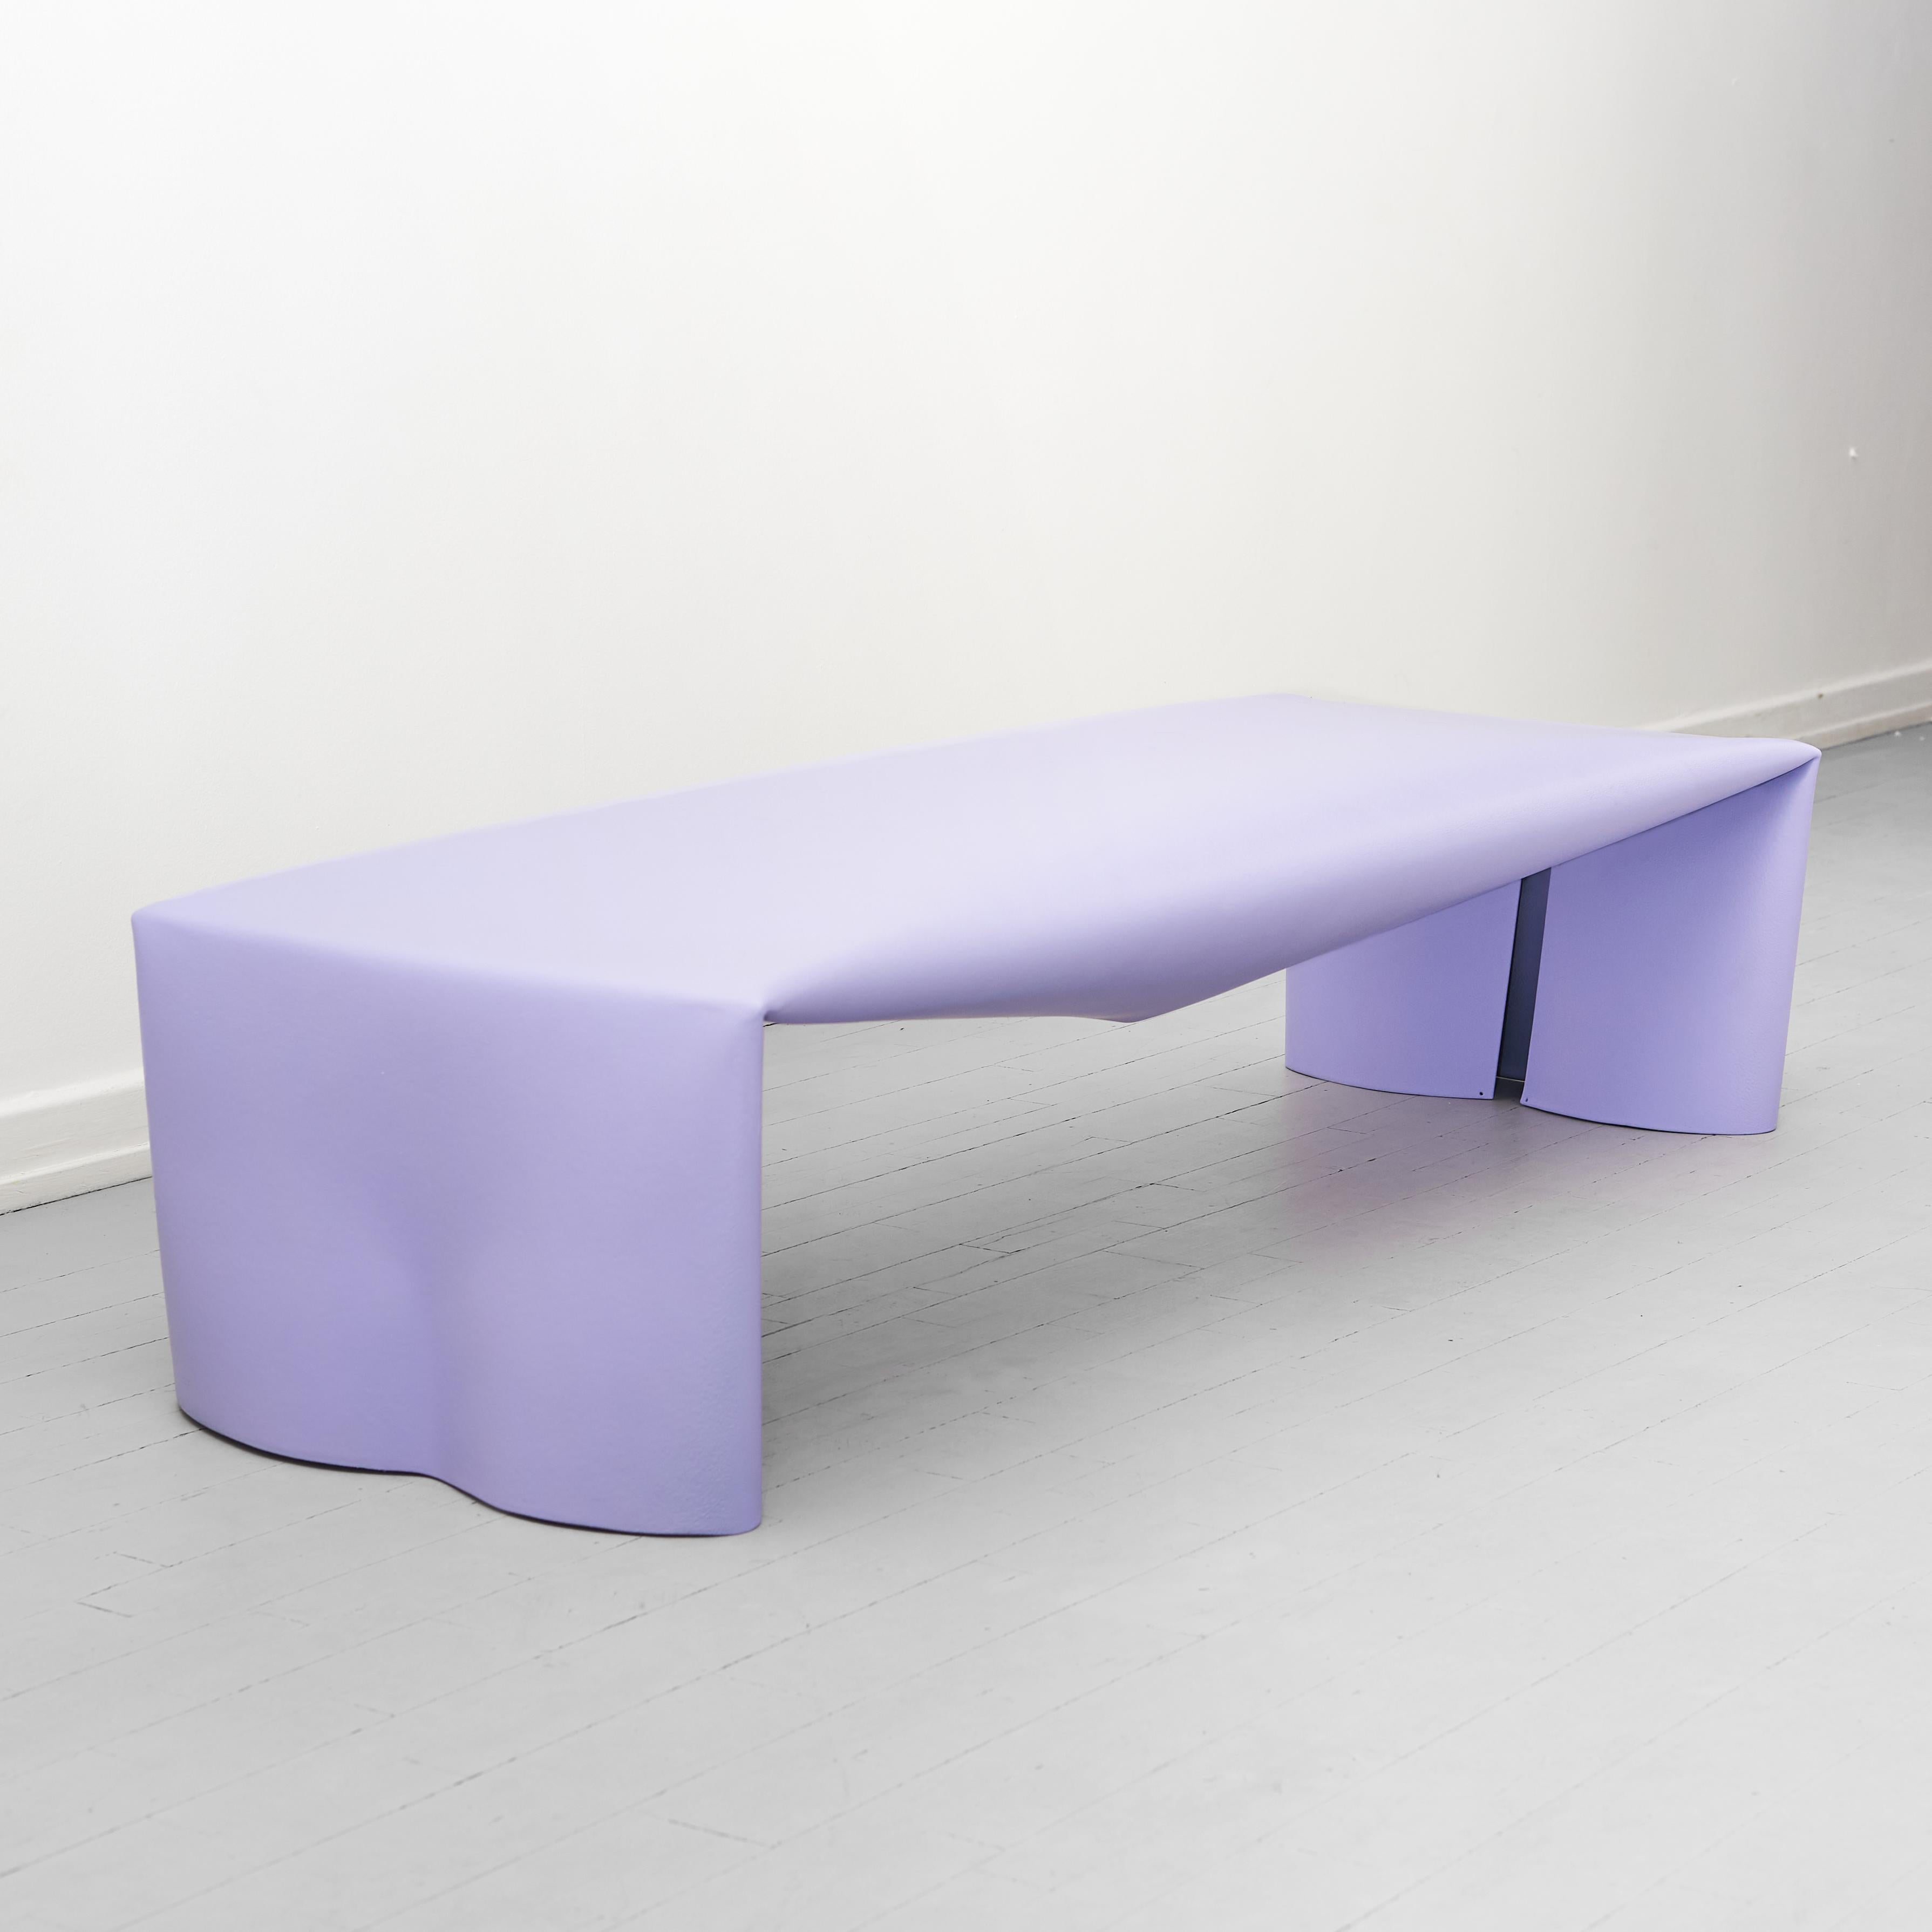 The steel bench is a monolithic steel form created from a combination of a few simple actions. Working with a bespoke metal fabrication company, a flat sheet of steel is manipulated in three operations: it is rolled into a tube, pressed flat and the